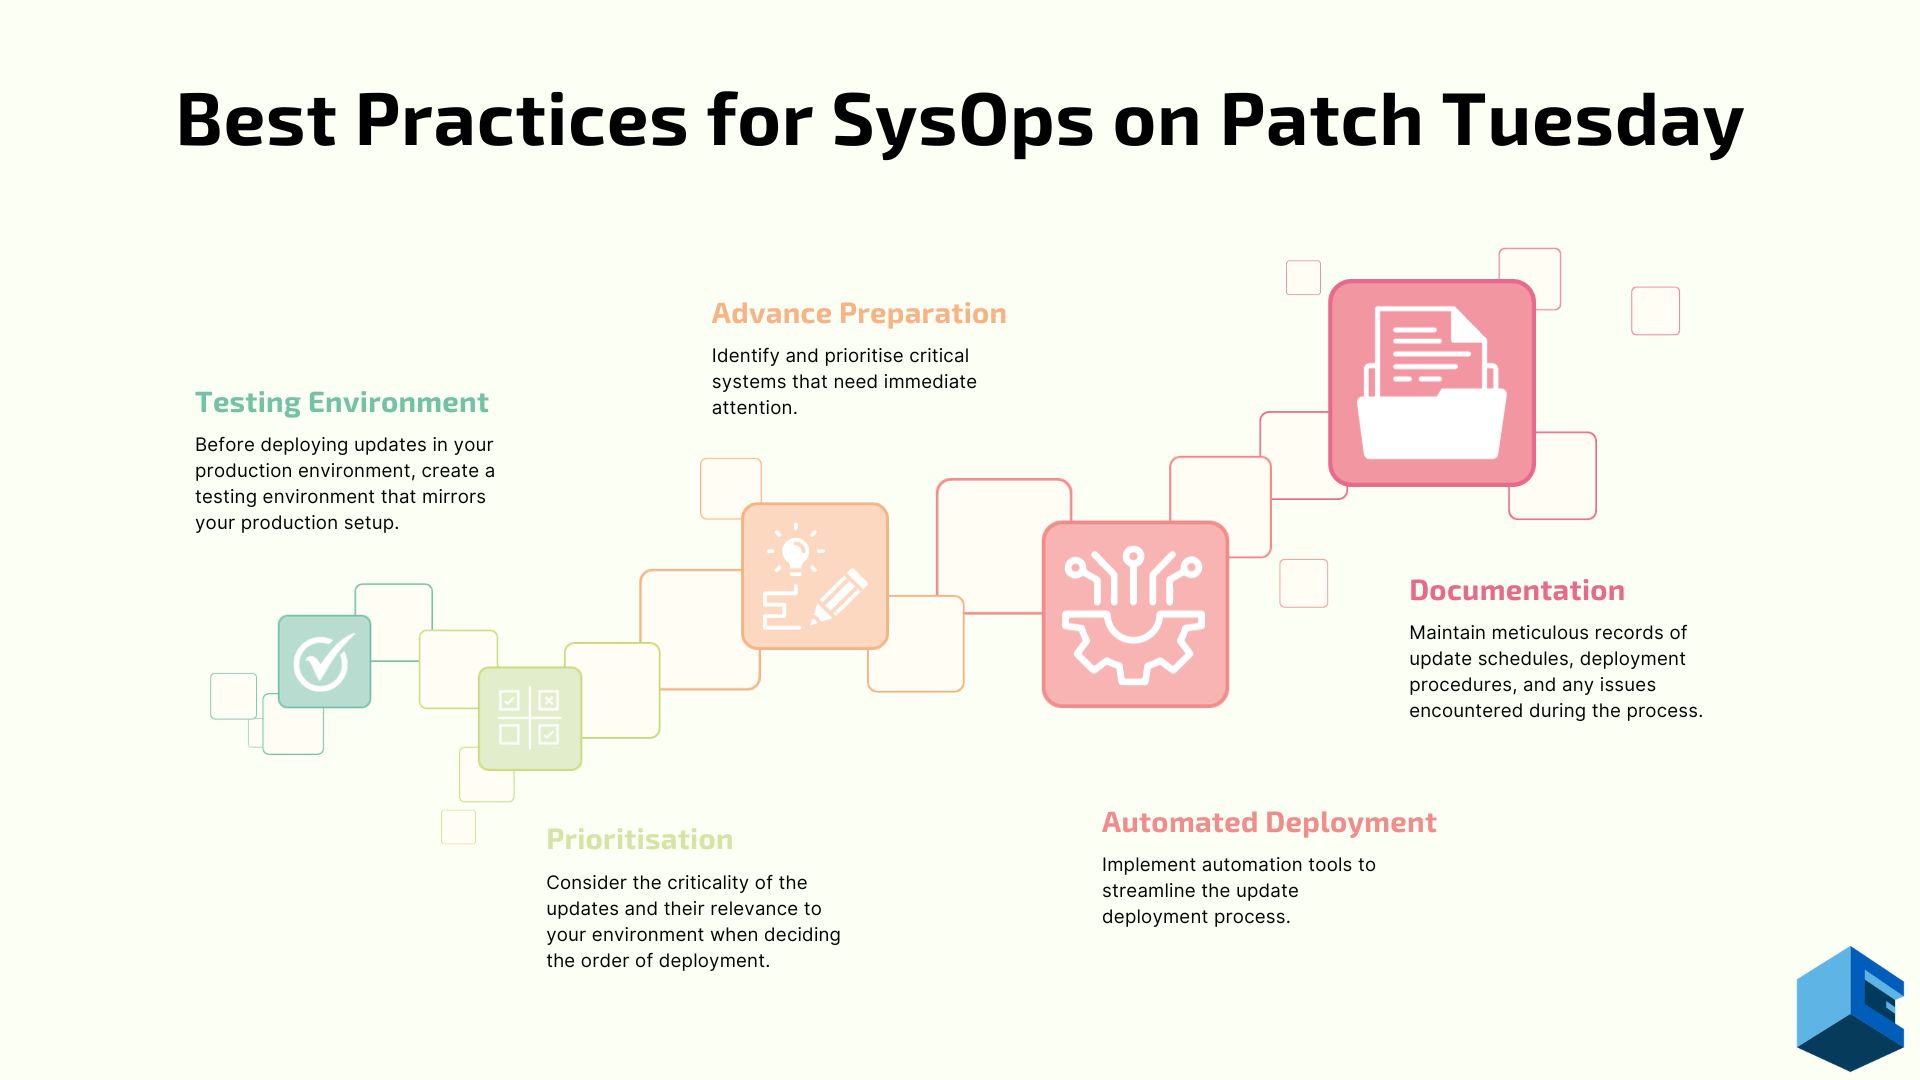 Best Practices for SysOps on Patch Tuesday